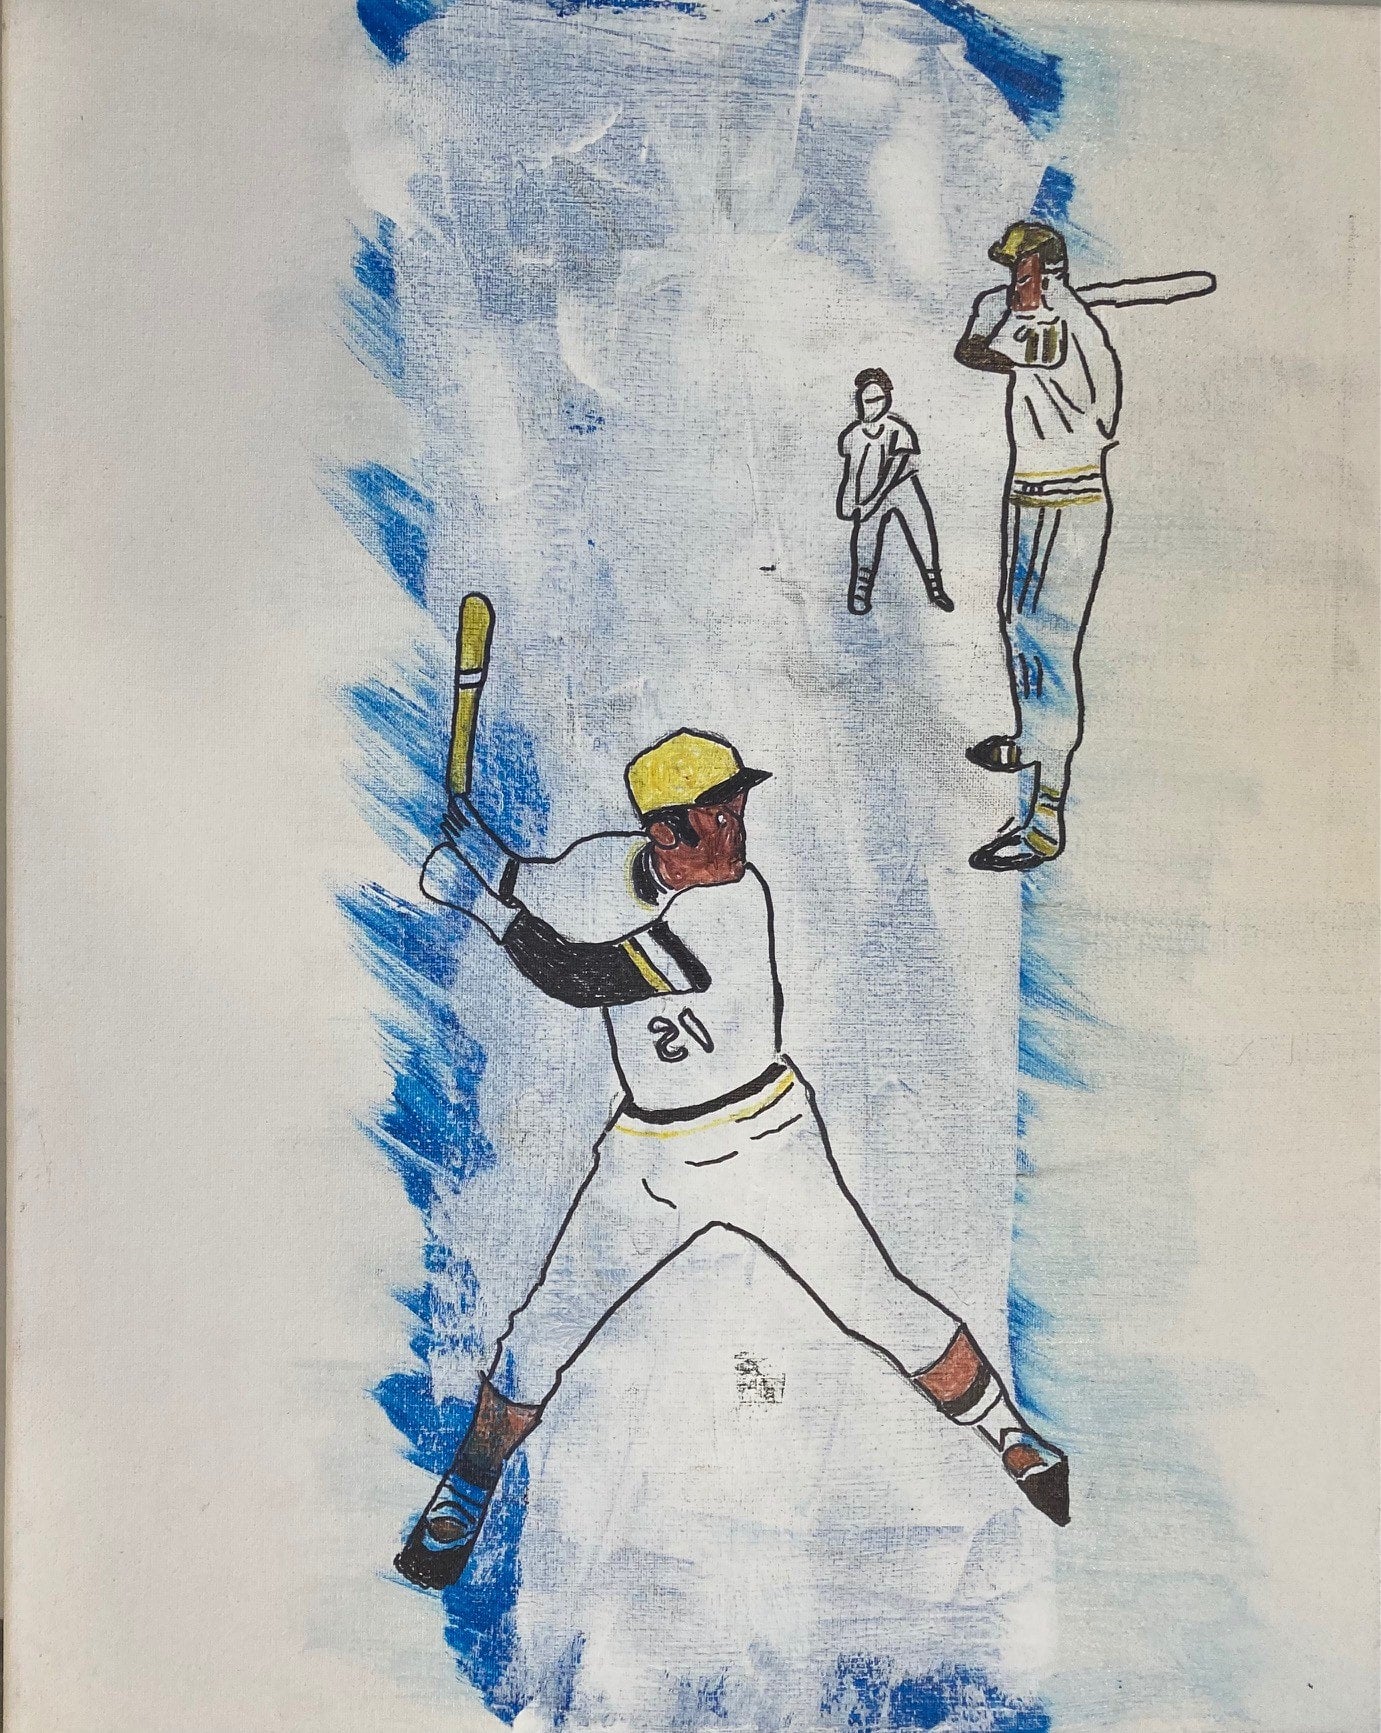 roberto clemente drawing